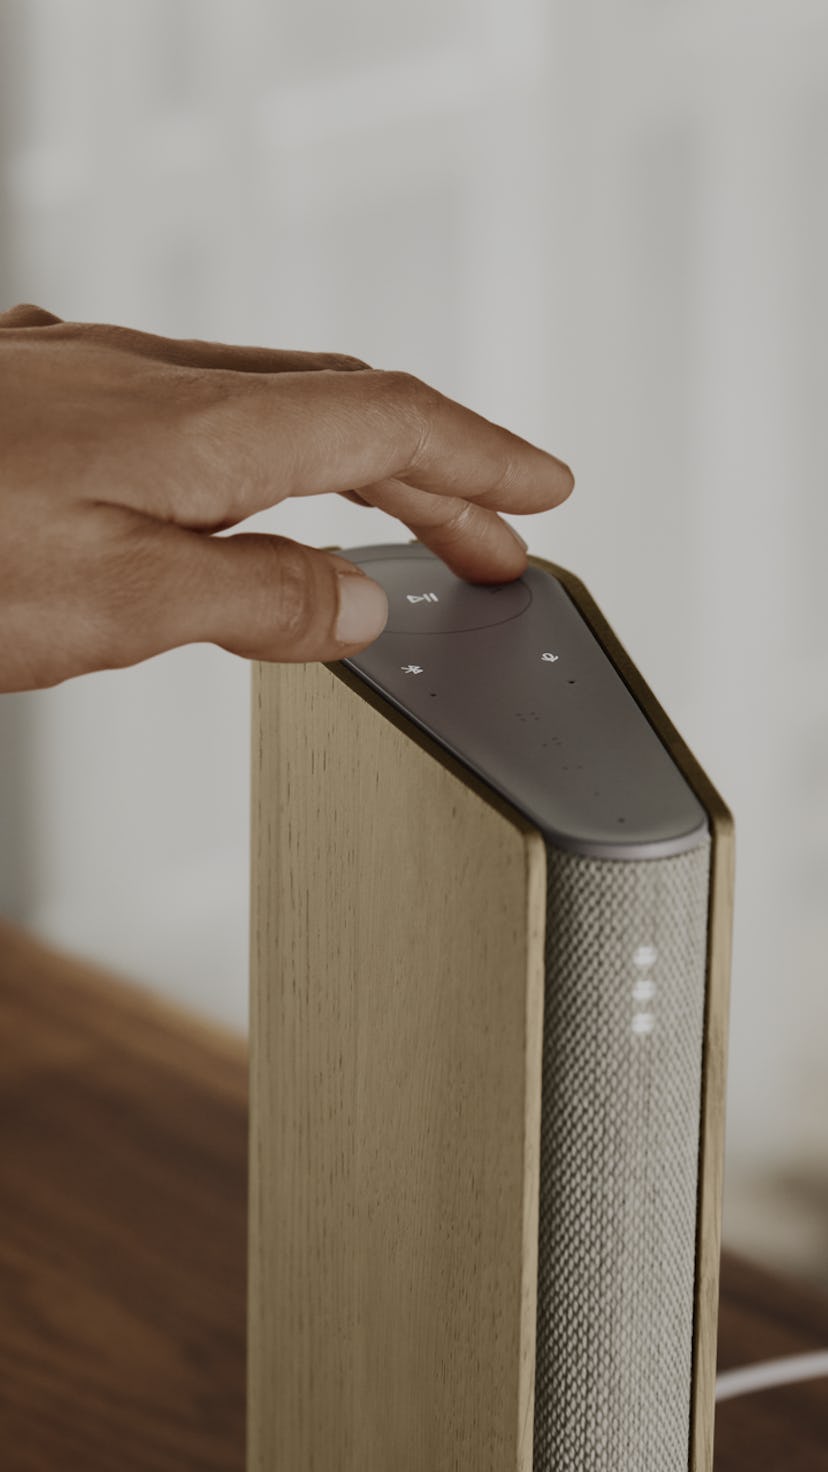 A hand is touching a compact Bang and Olufsen Emerge speaker.